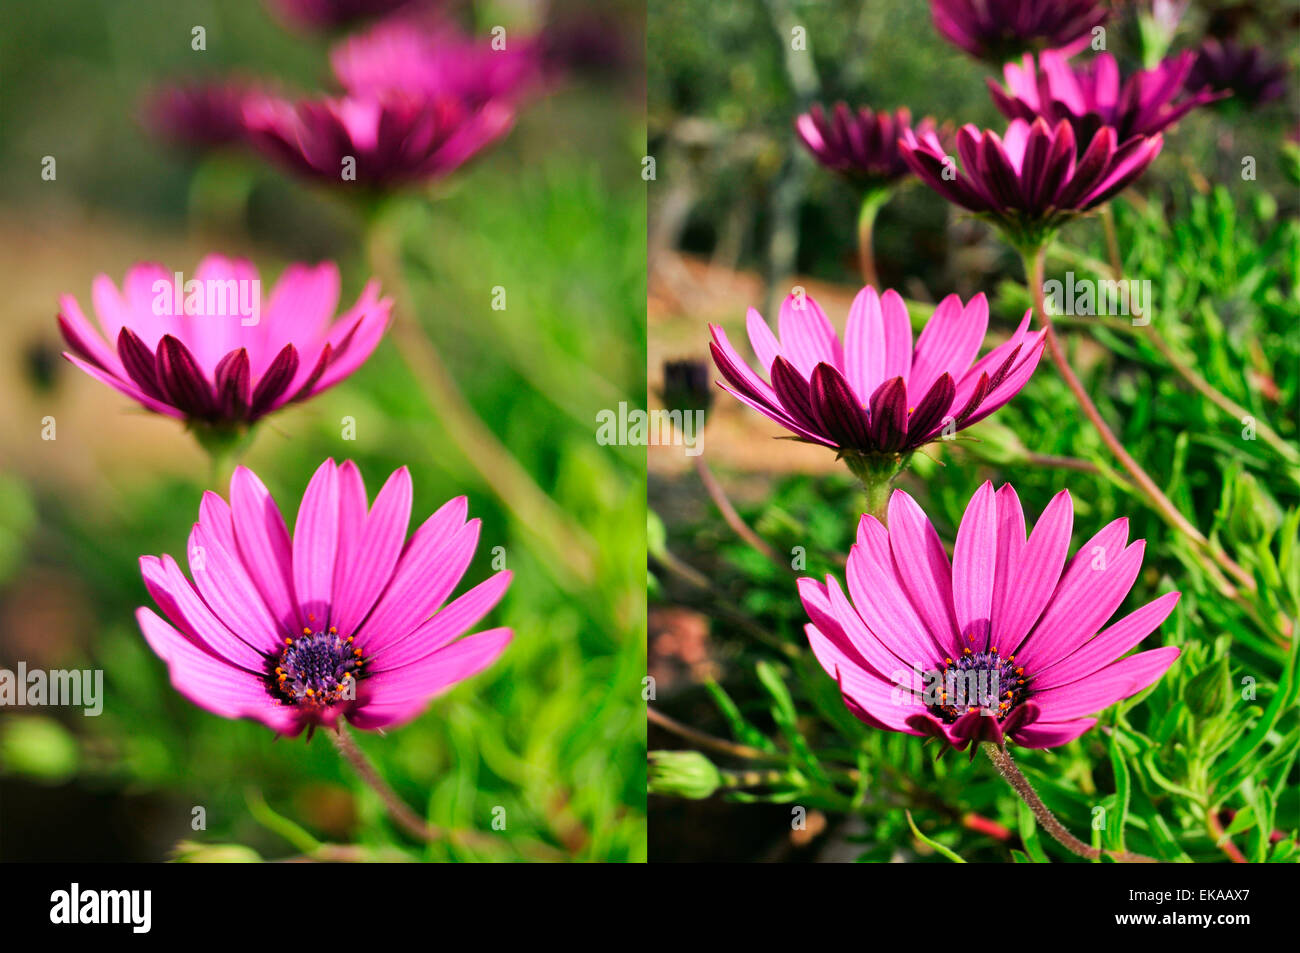 two different photos of some purple flowers shot with different apertures, the left with an aperture of f/2 and the right with a Stock Photo